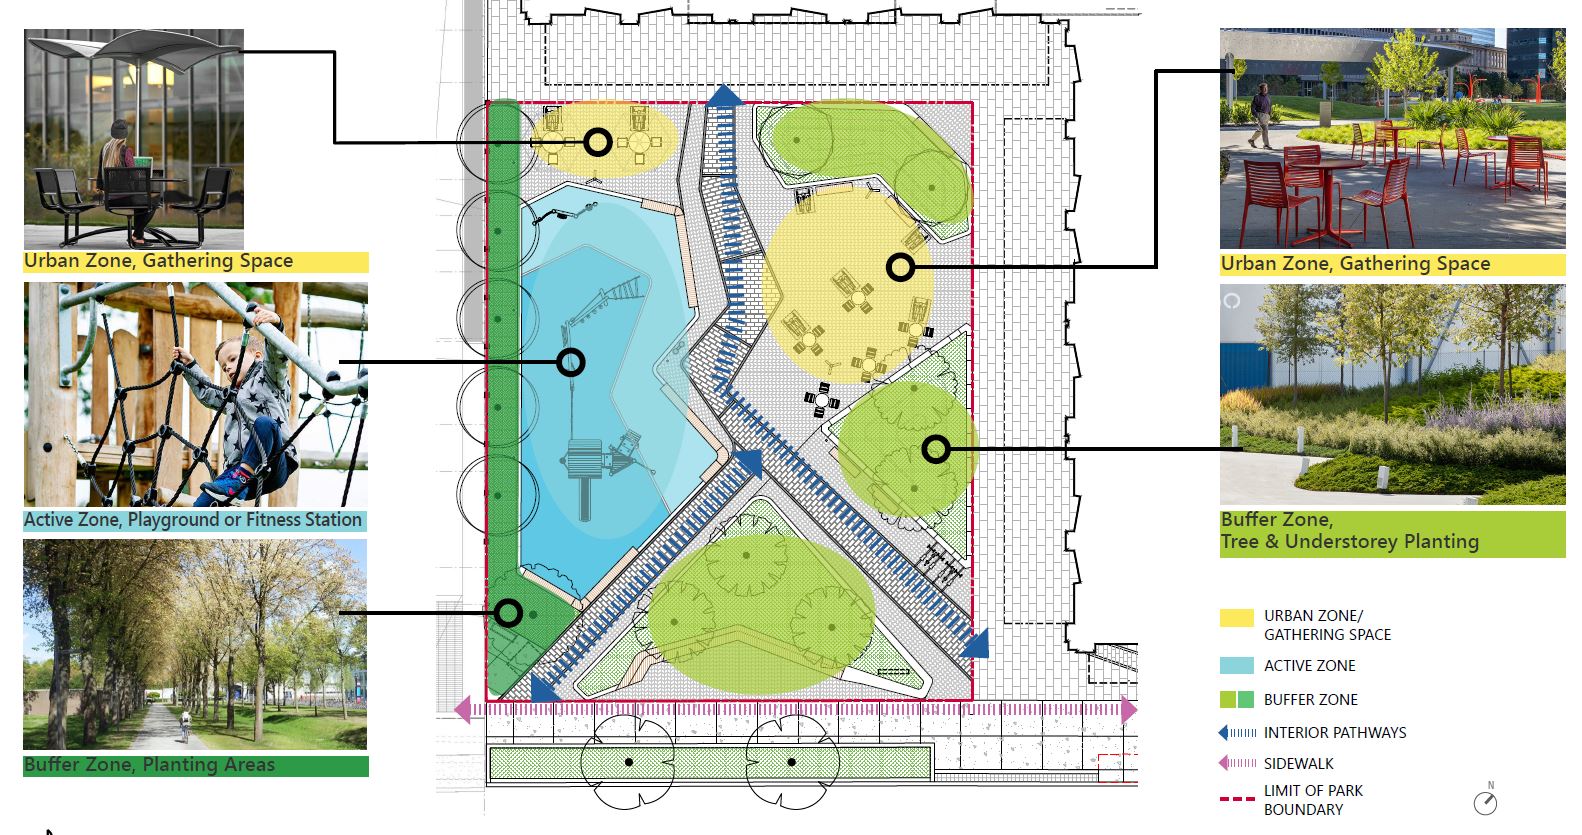 The image shows the Proposed Design in aerial view, with labels indicating the different functional zones. Urban Zone is a gathering space, shaded in yellow. Buffer Zone is where planting areas will be, and is shaded in green. Active Zone is where a playground or fitness station will be and is shaded in blue.